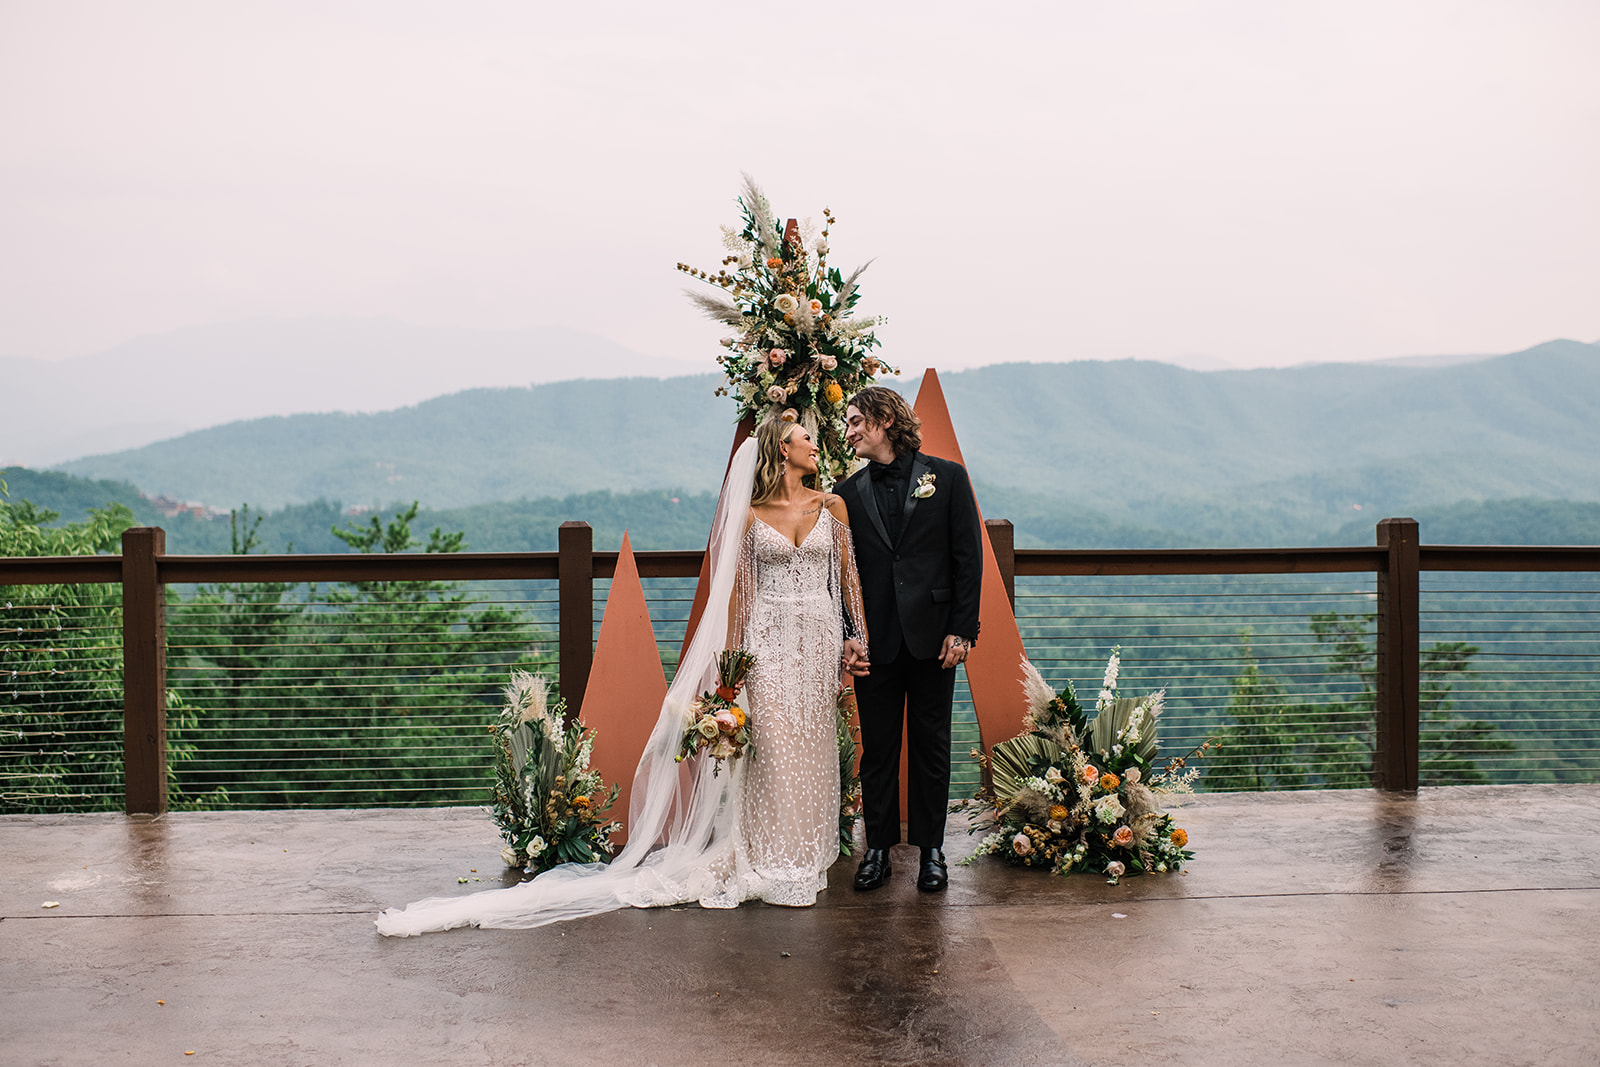 edgy boho wedding in the mountains | The magnolia venue